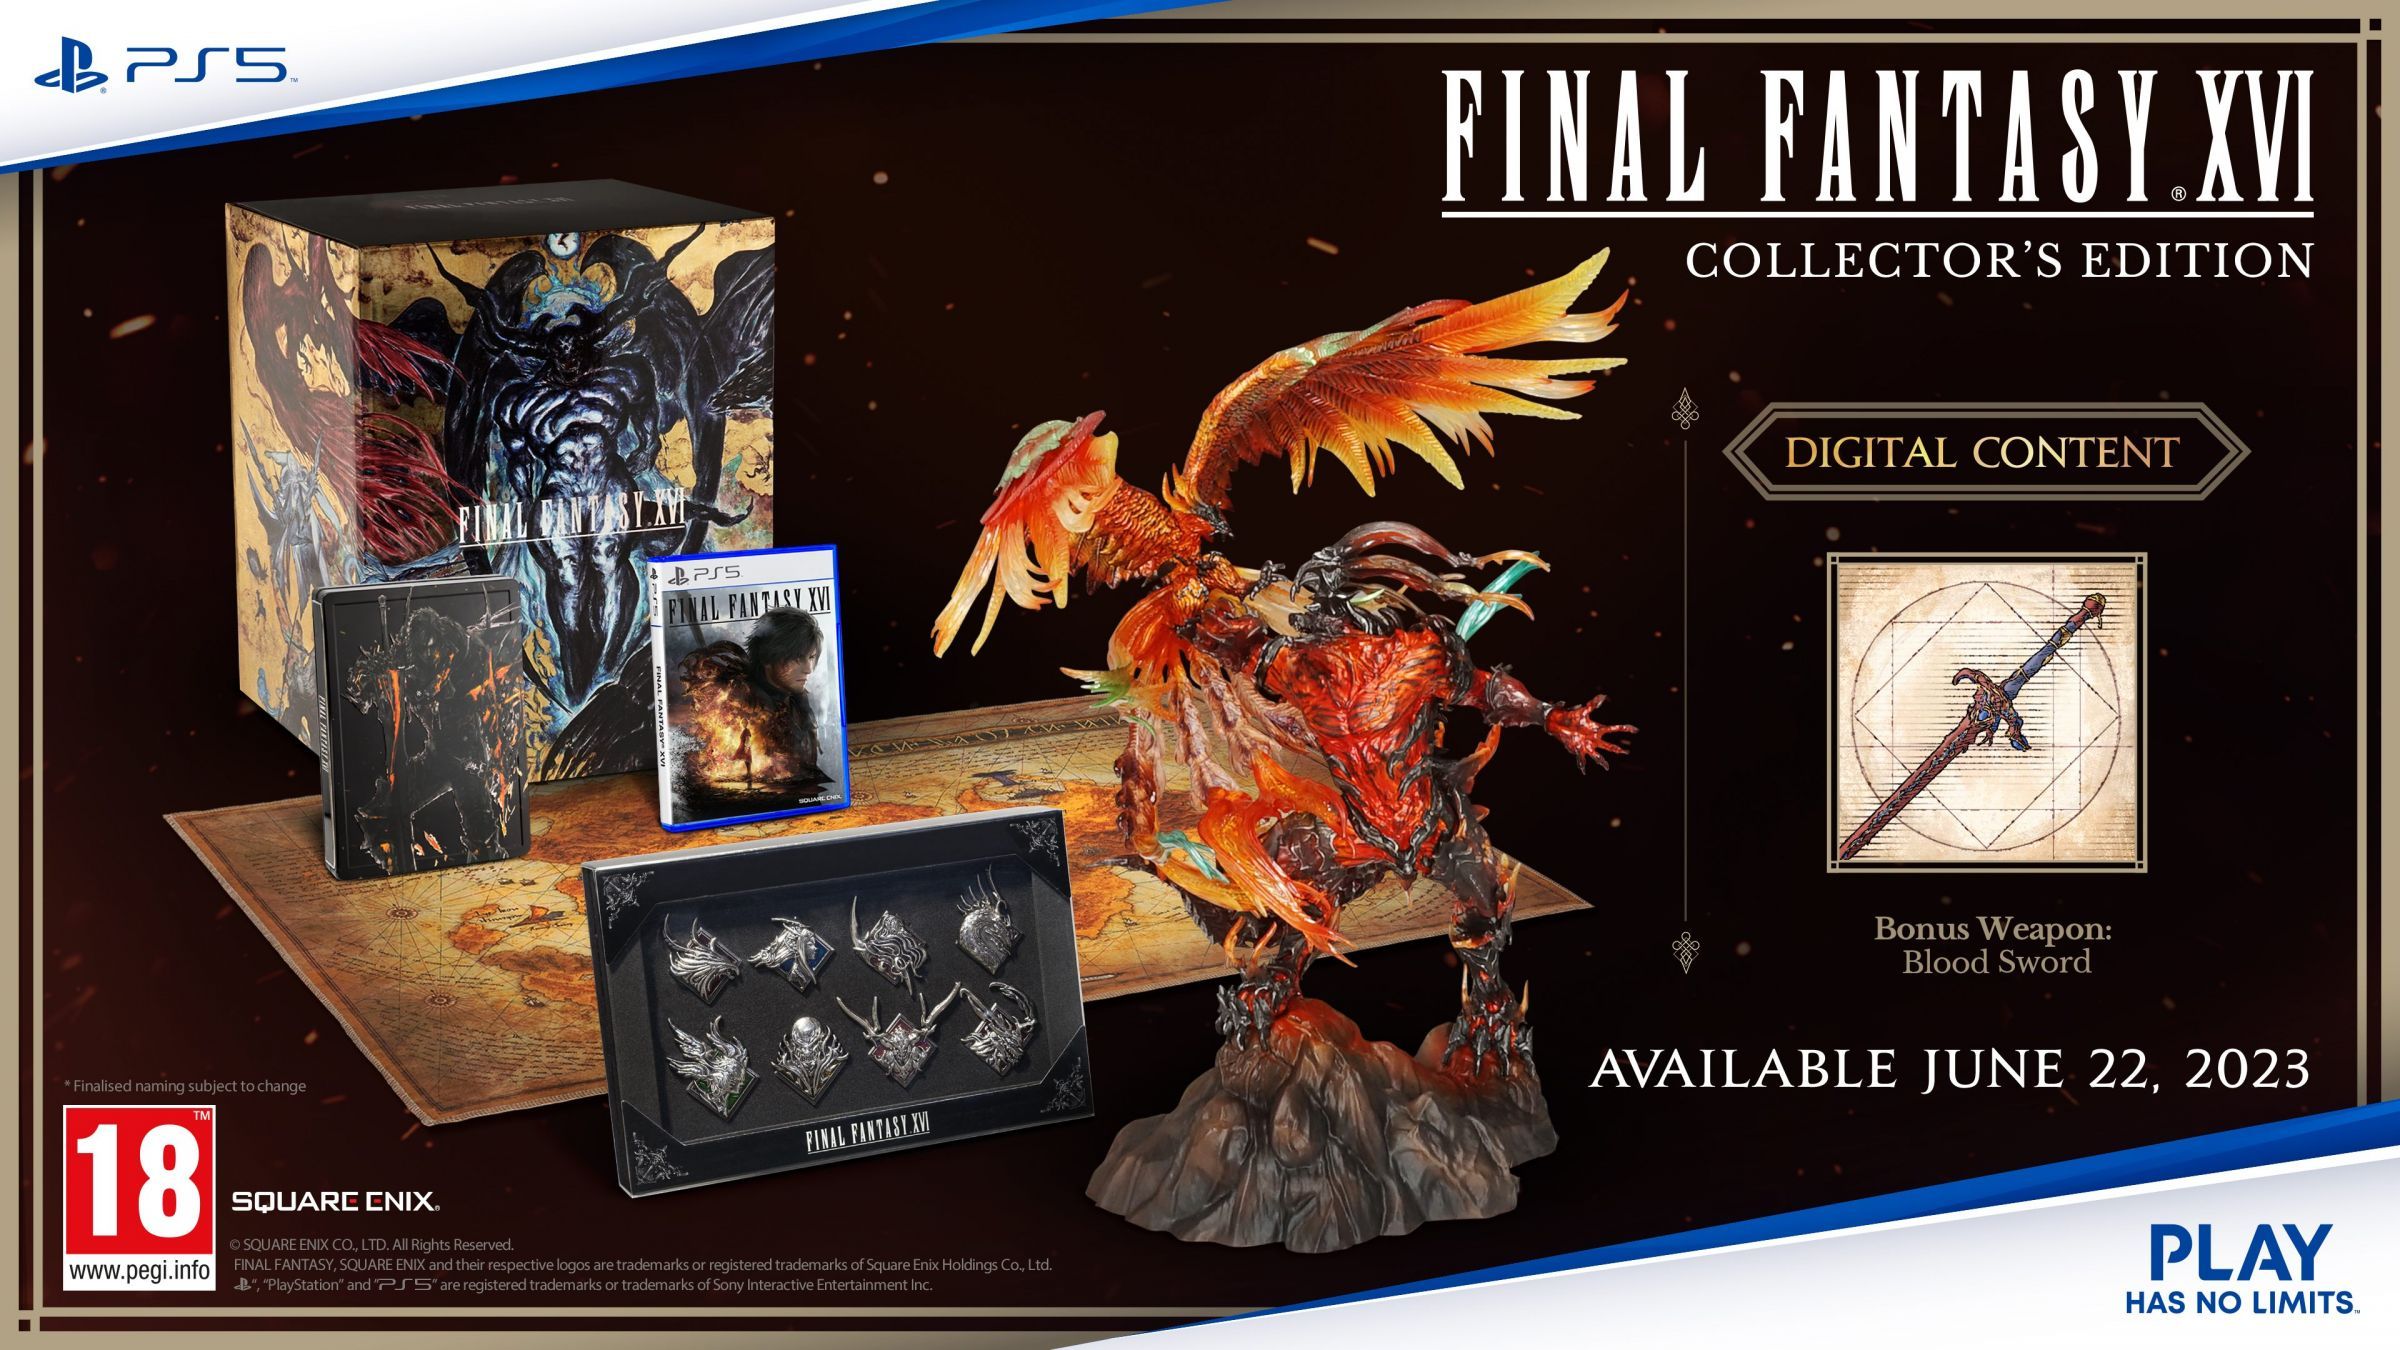 Everything that comes with the collector's edition of Final Fantasy 16. This includes physical goods like a statue and some pins